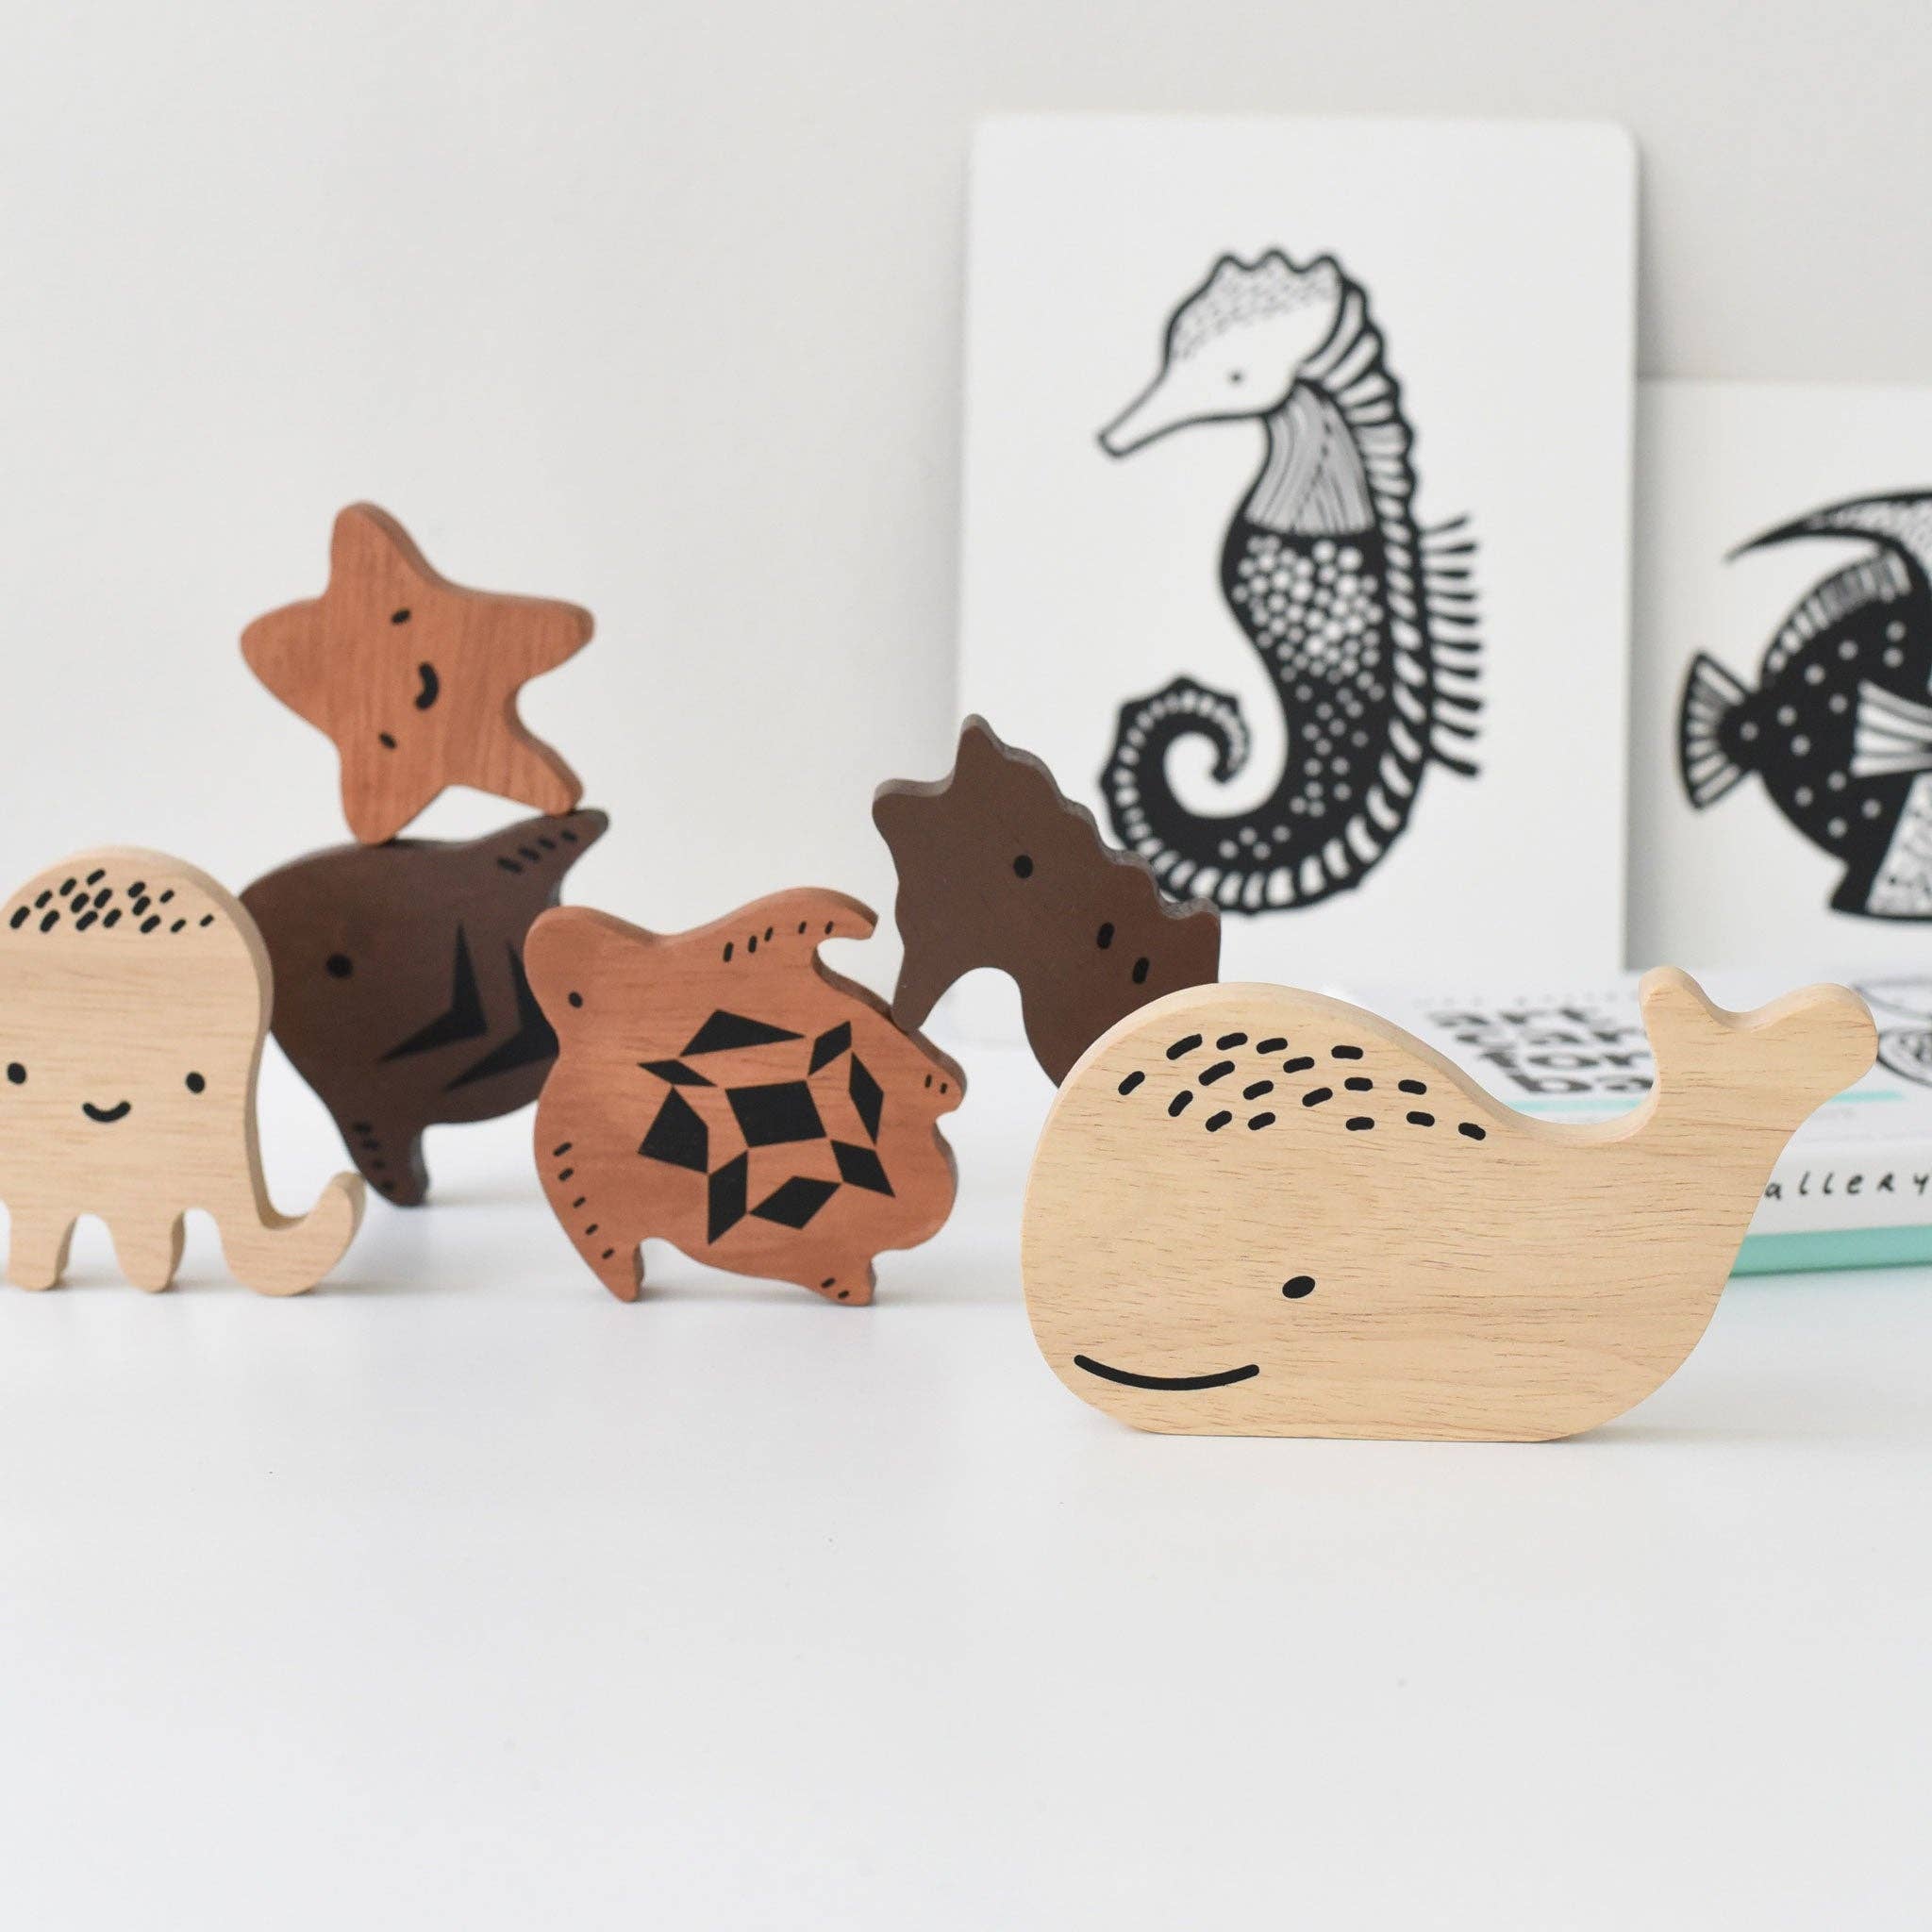 WOODEN TRAY PUZZLE - OCEAN ANIMALS - 2ND EDITION